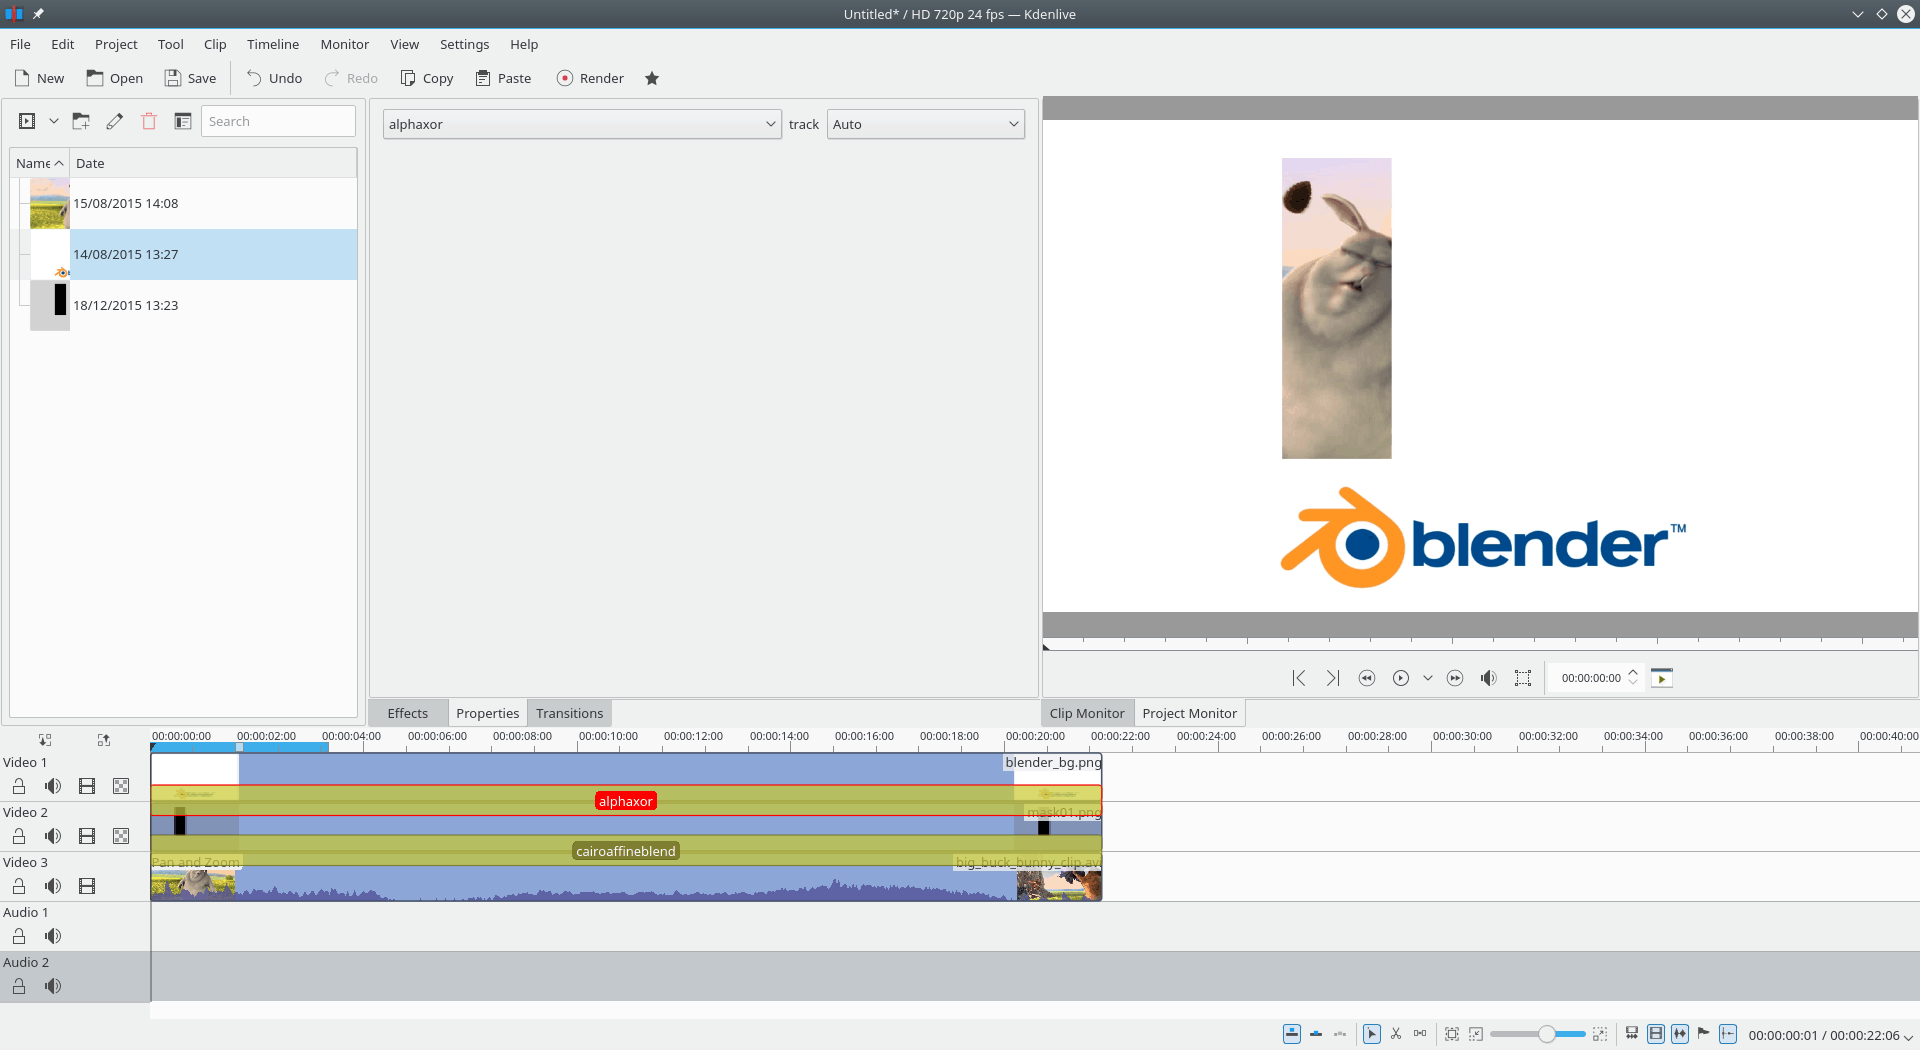 Combining cairoaffineblending and alphaxor with a mask, you can have a clip show through an opaque layer.